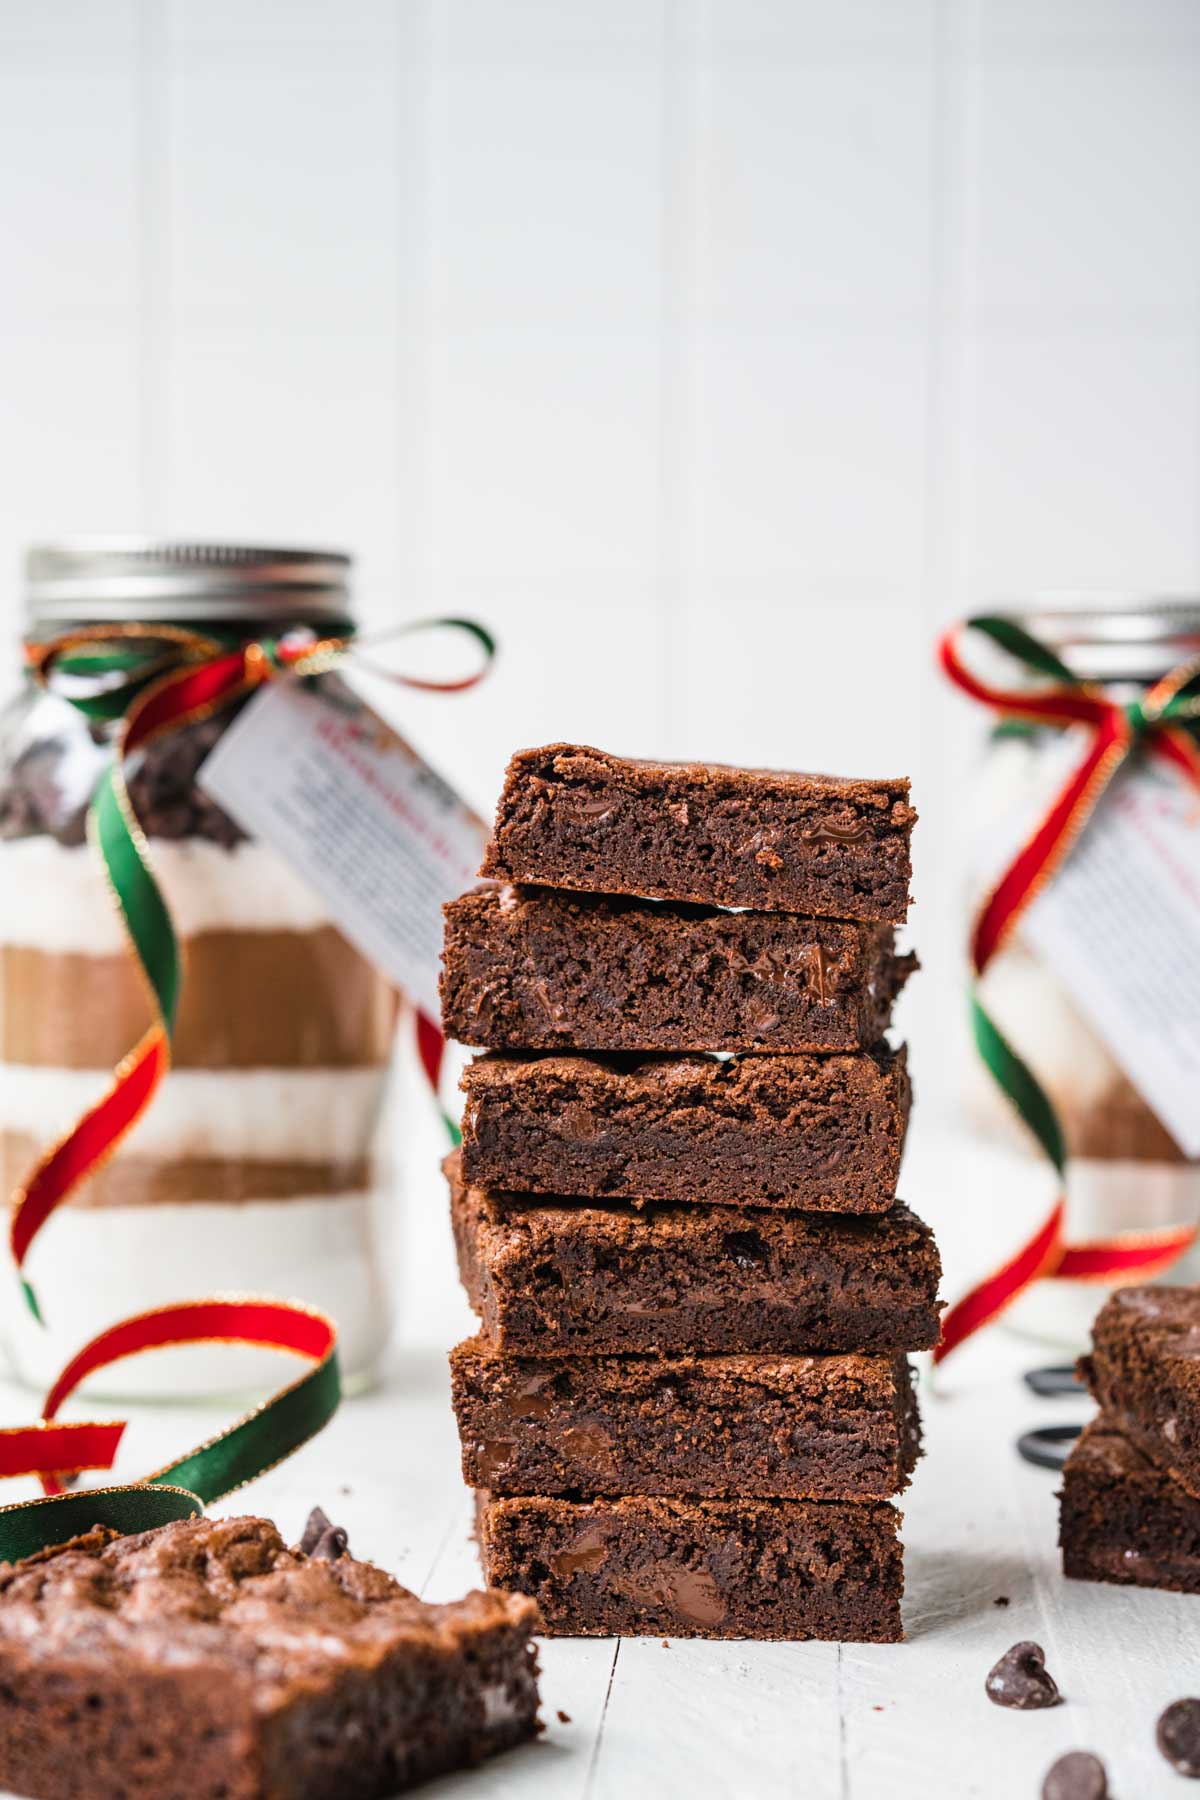 Brownies in a Jar with layered ingredients next to finished baked brownies